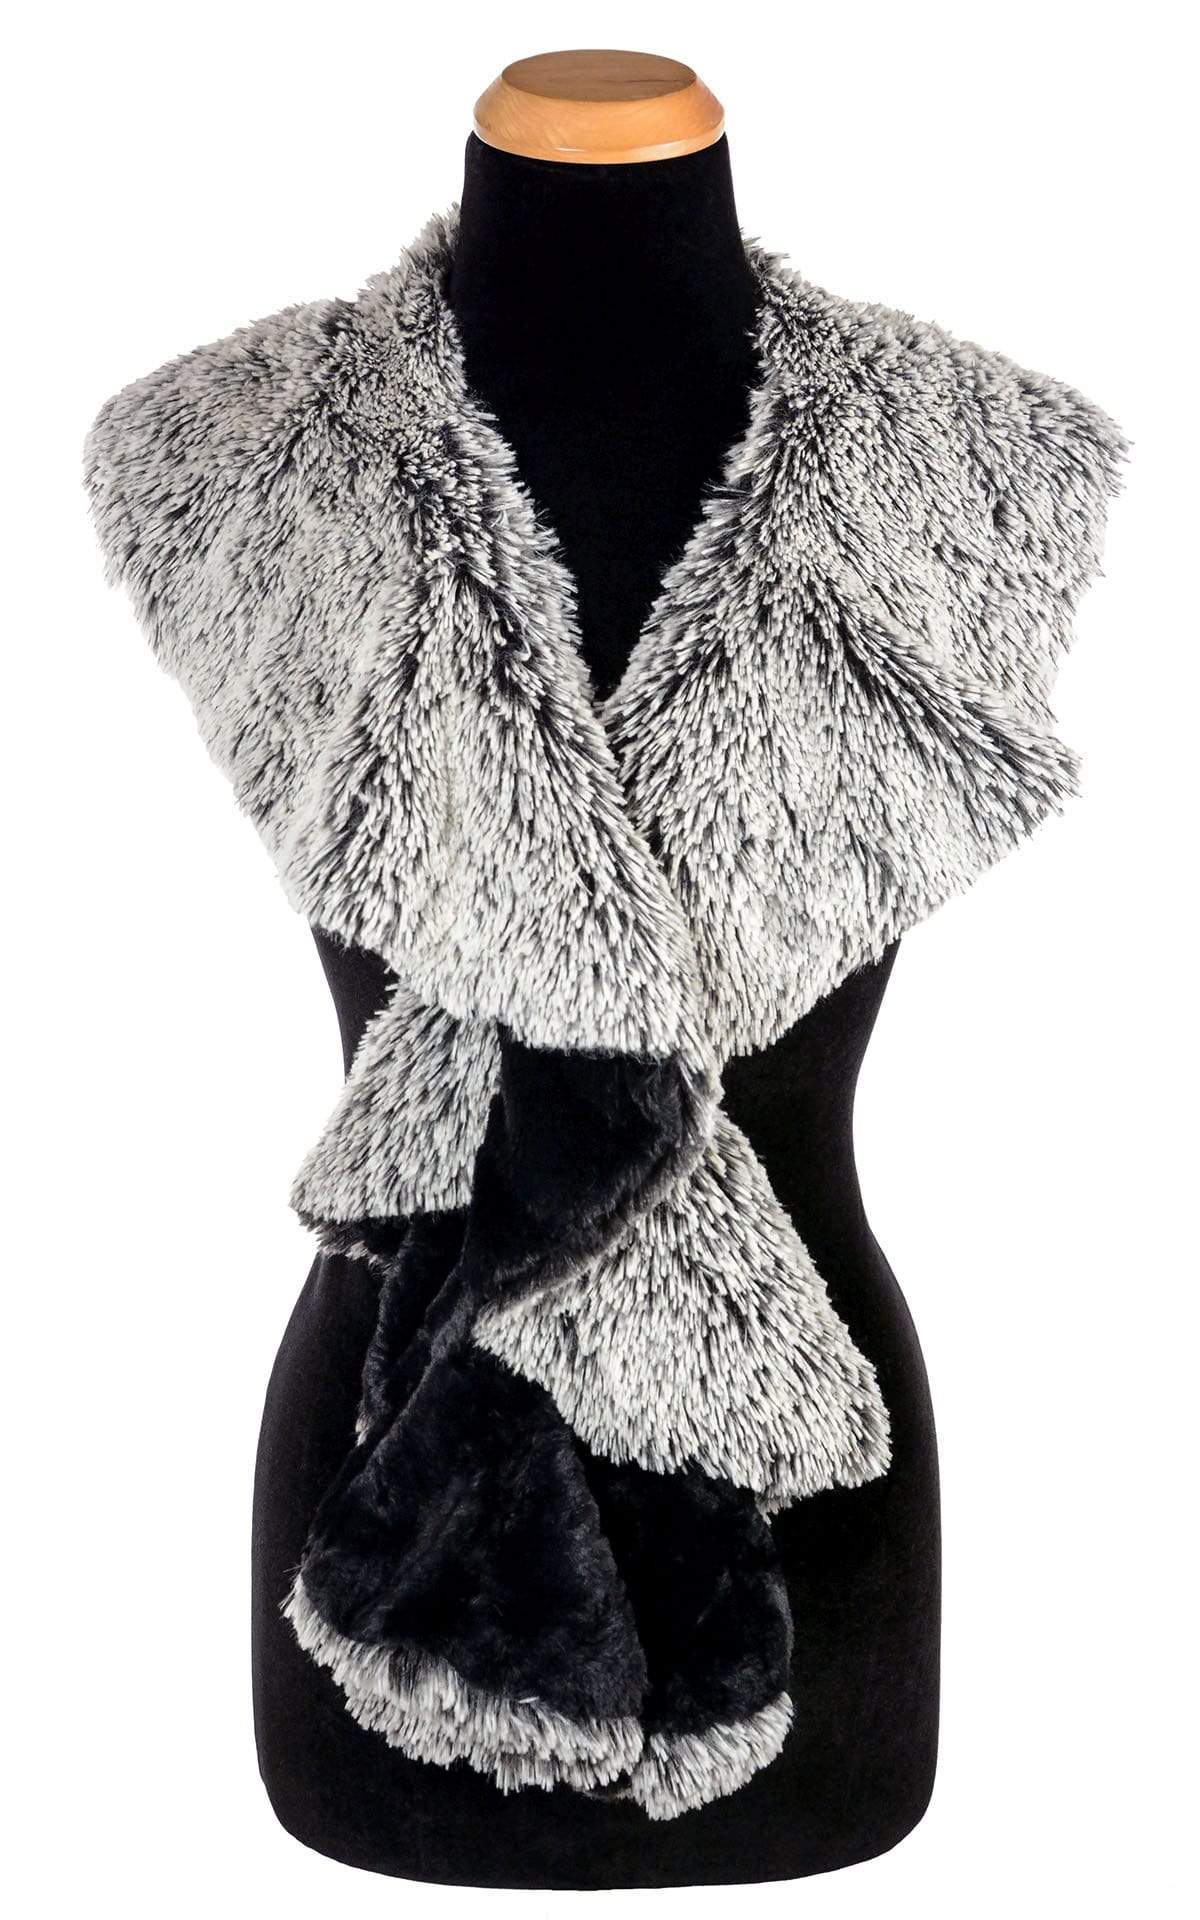 Cascade Scarf | Silver Tipped Fox and Black Cuddly Faux Fur | Handmade Seattle WA USA by Pandemonium Millinery